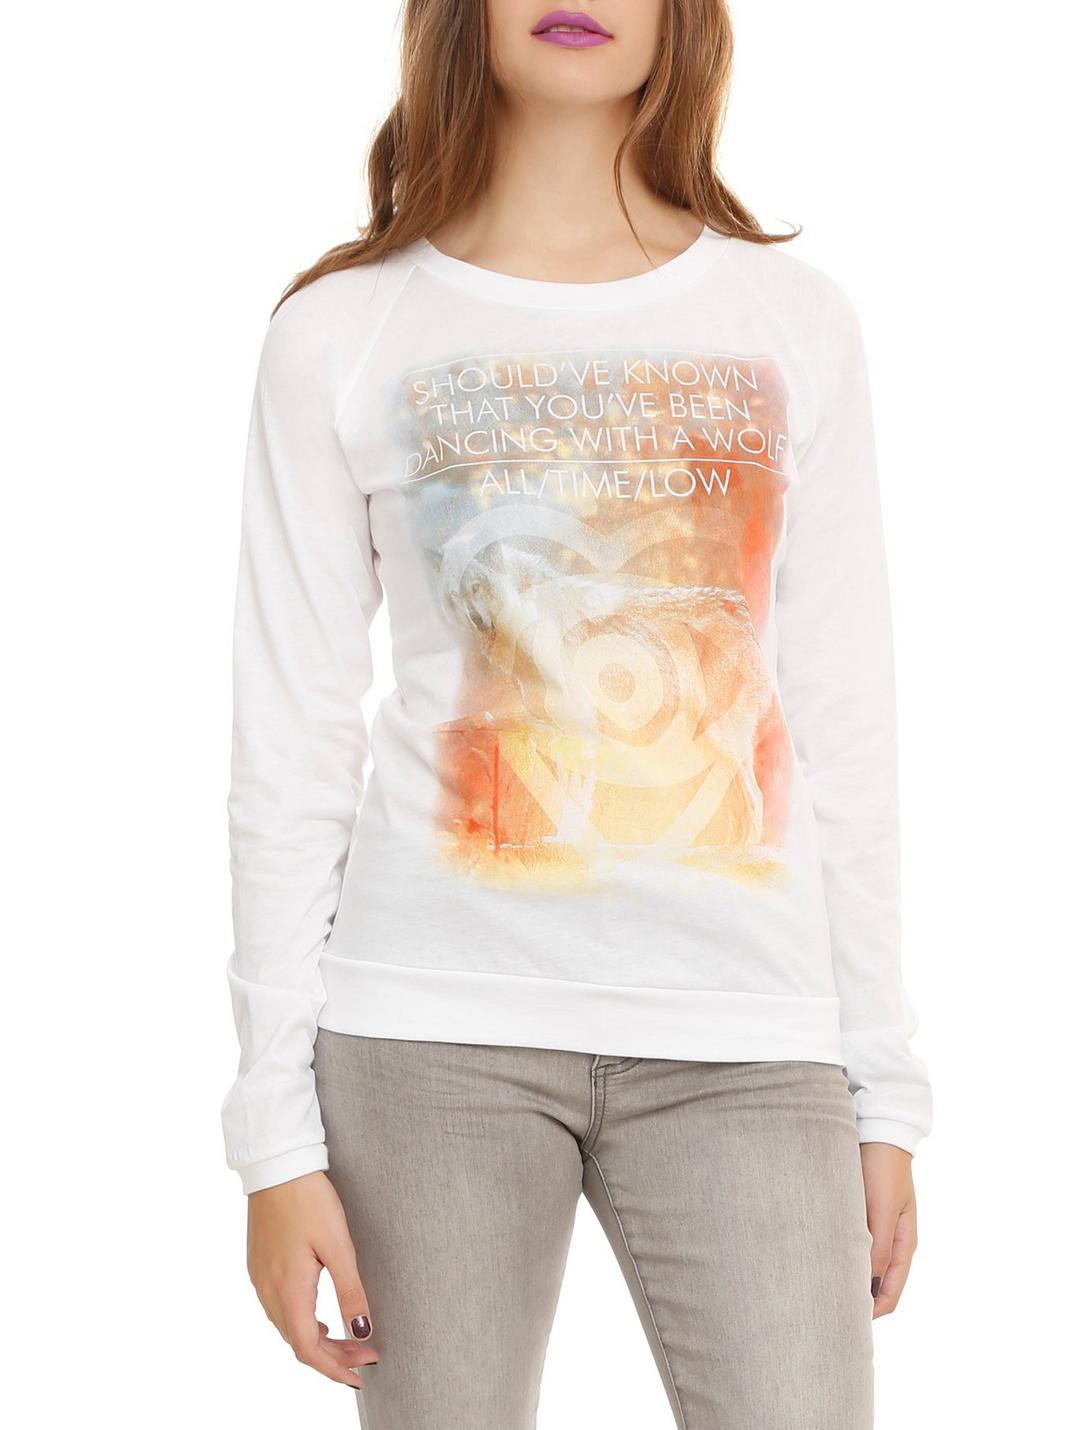 All Time Low Dancing With A Wolf Girls Pullover Top, WHITE, hi-res